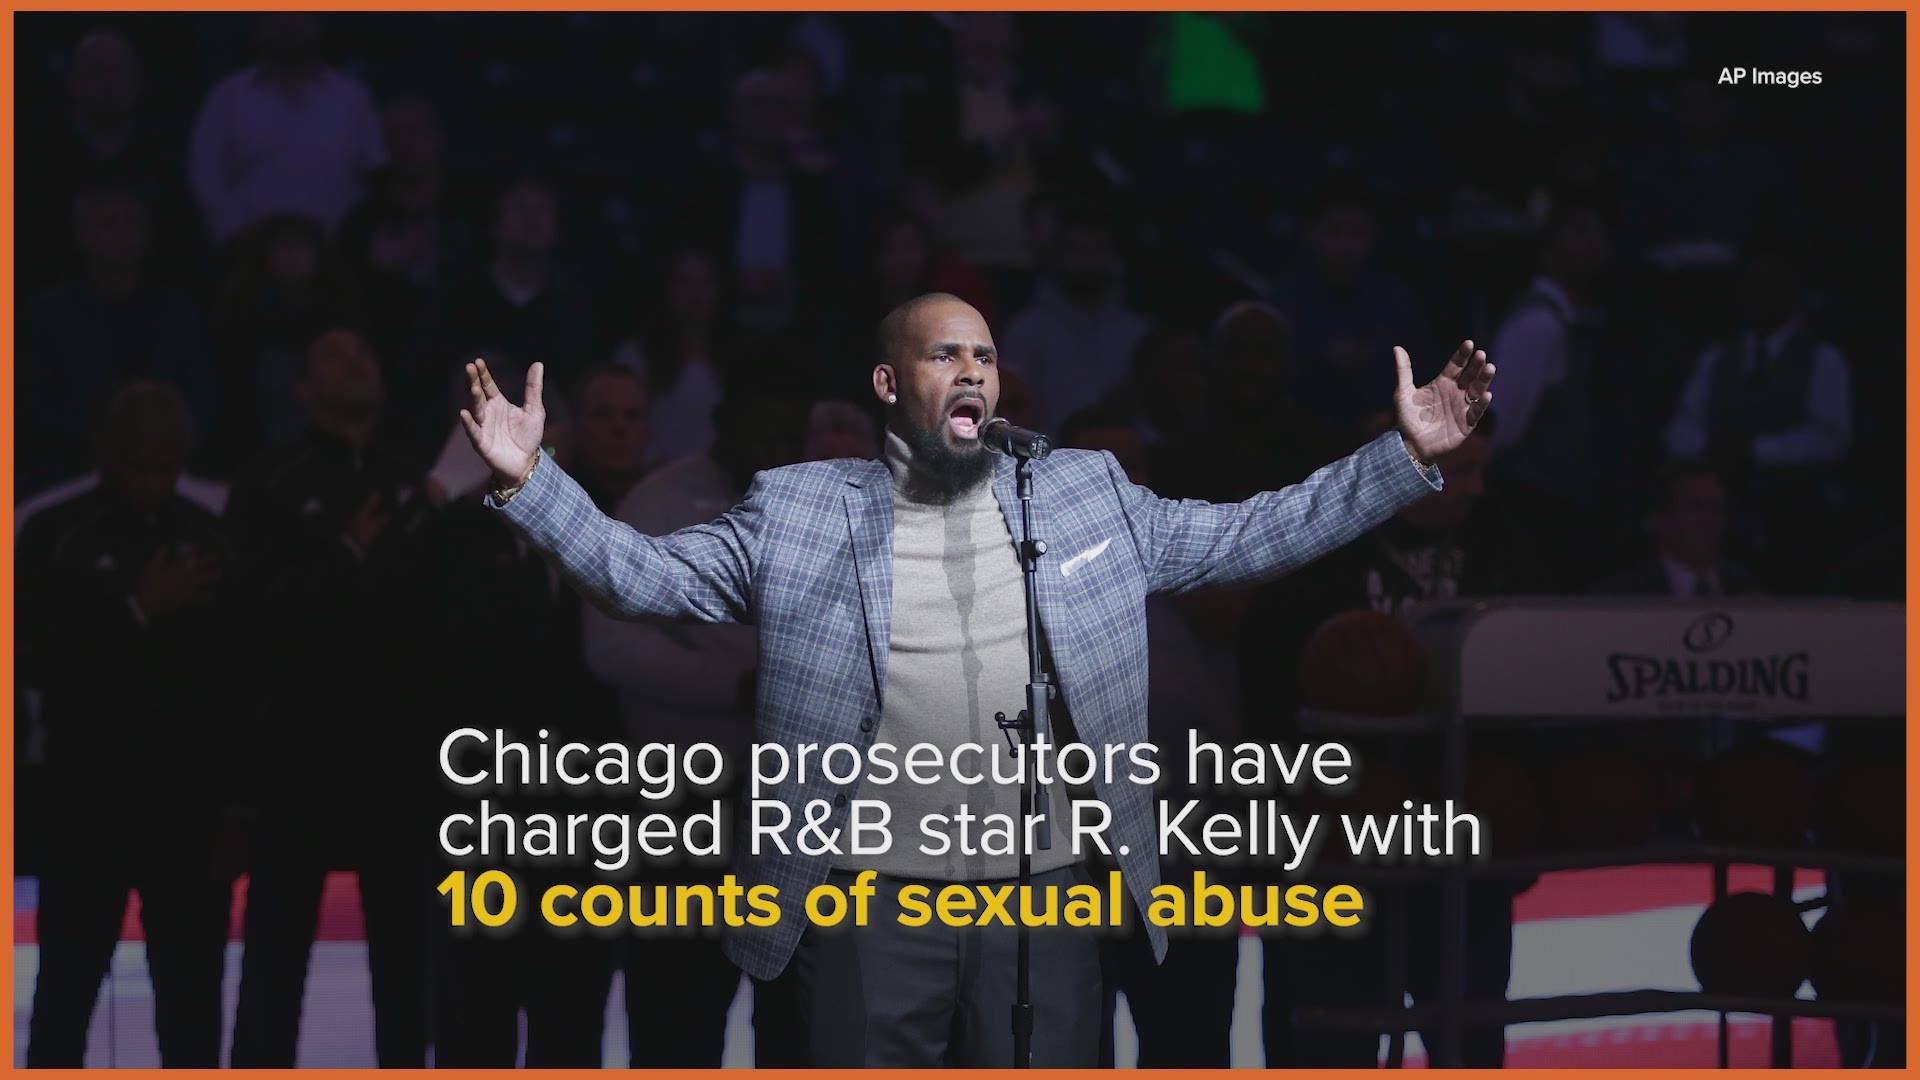 Xxx Hd Video Songs Com - R. Kelly met underage girl while on trial for child porn | wwltv.com